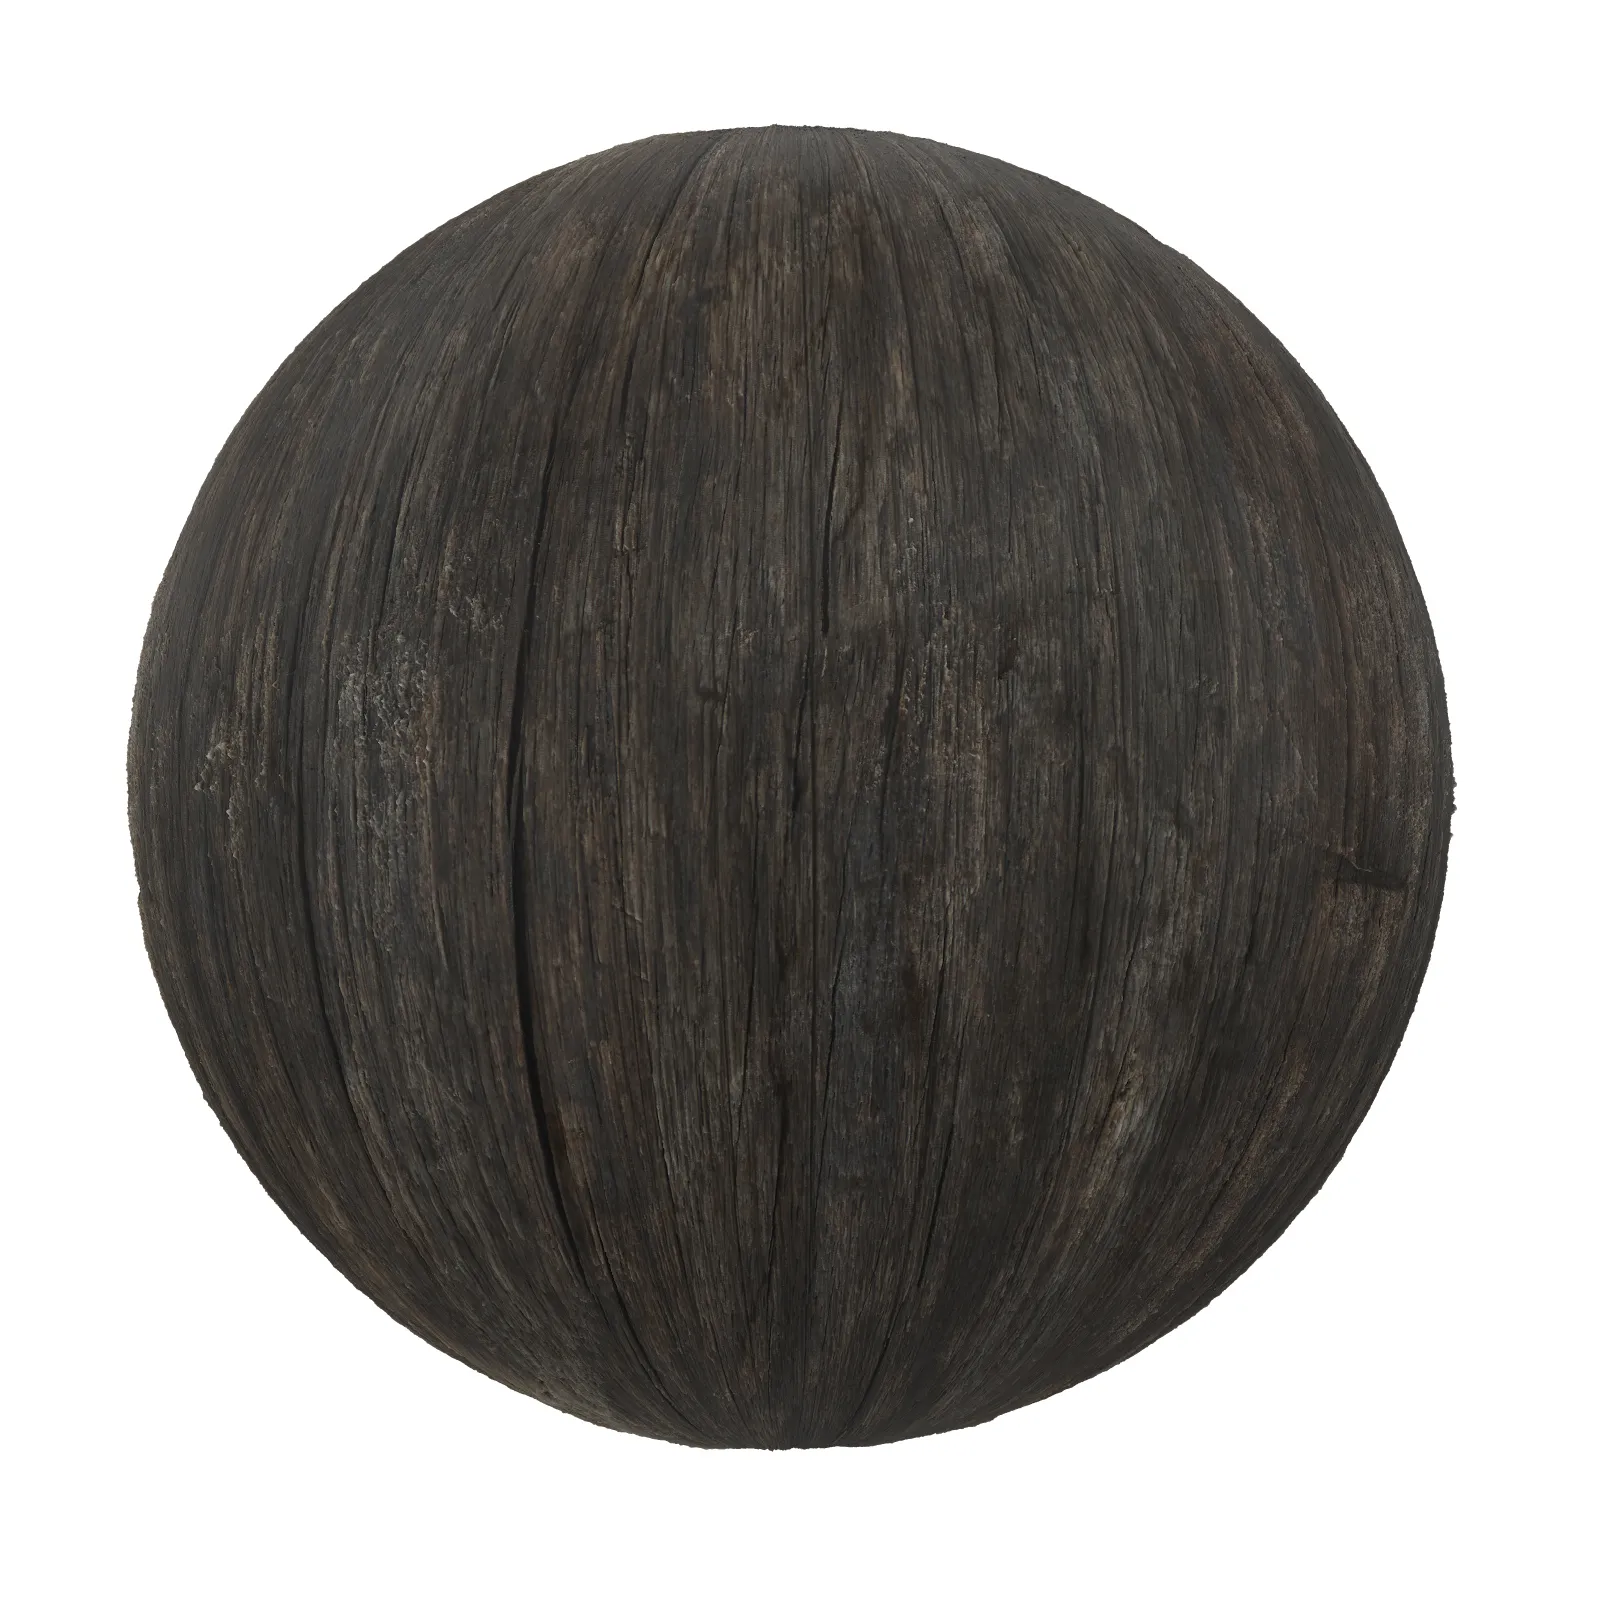 TEXTURES – WOOD – Old Wood 9